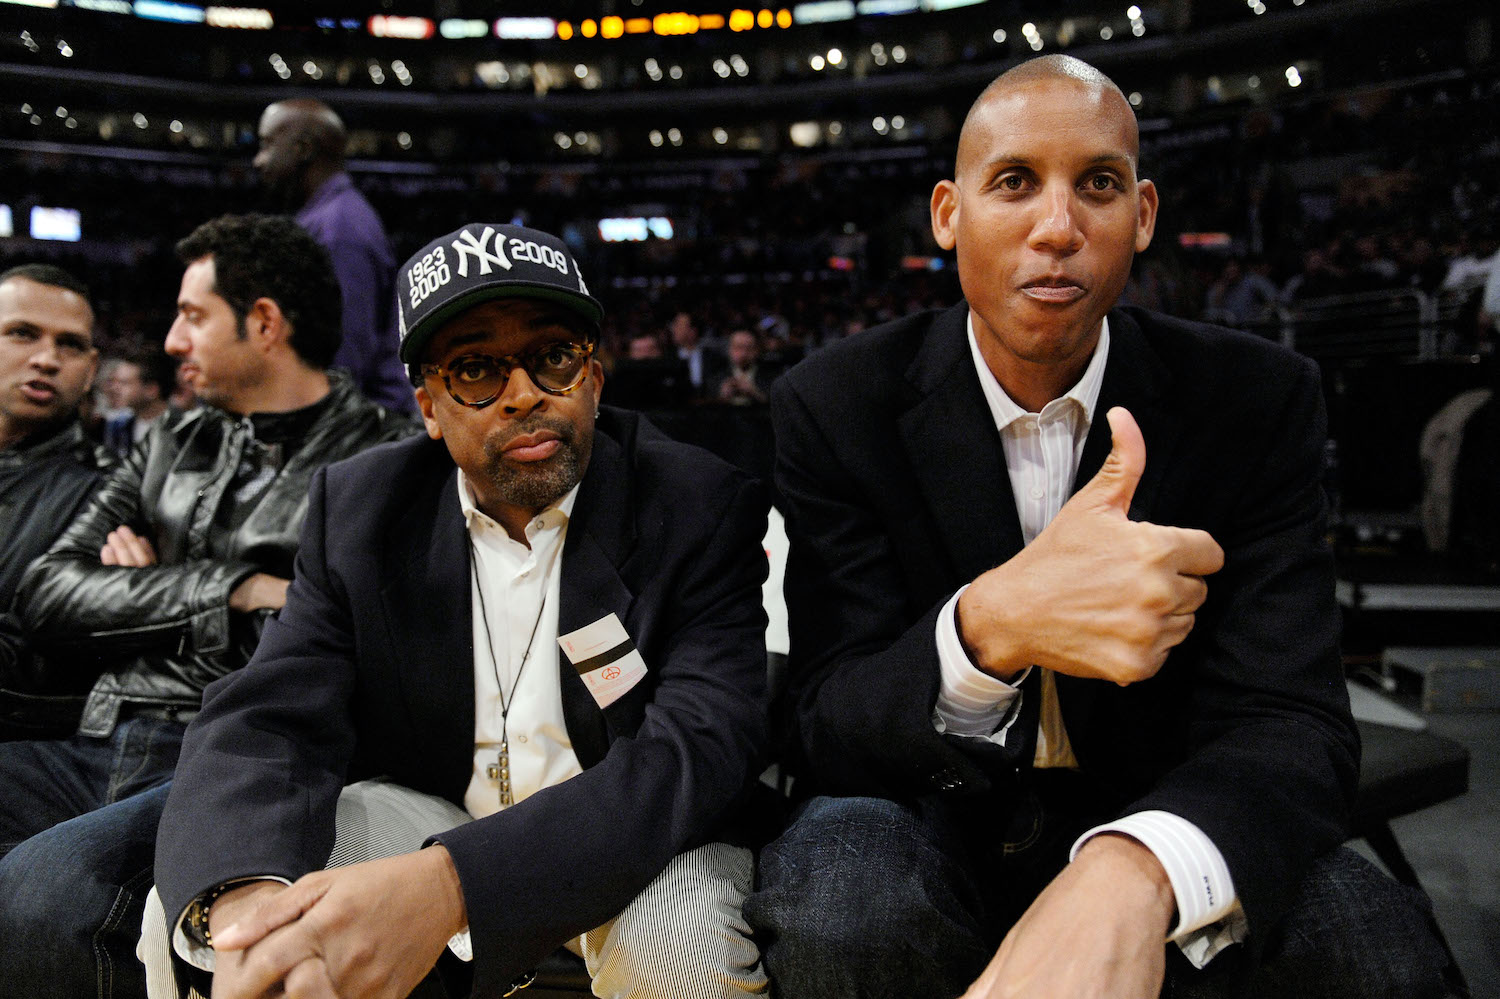 Reggie Miller Lost Bet to Spike Lee and Had to Visit Mike Tyson in Prison